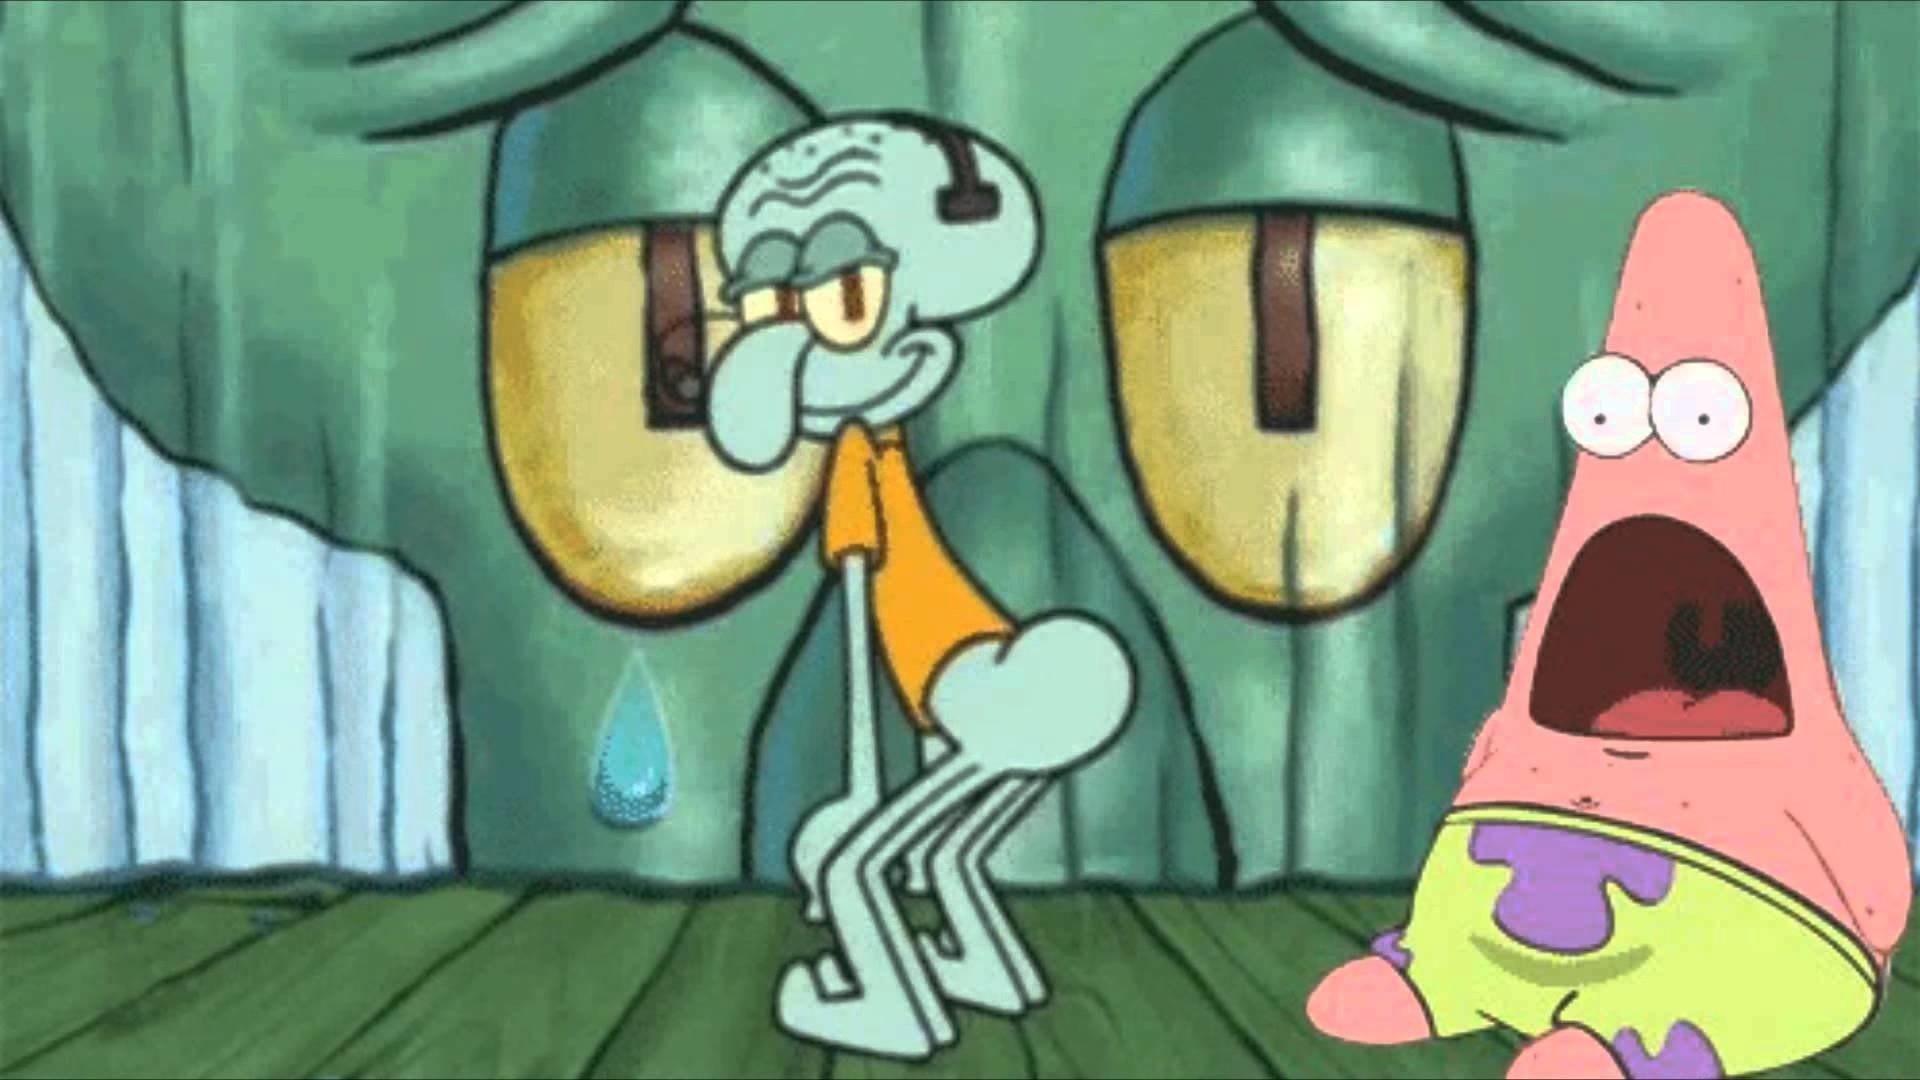 Squidward is sitting on the floor with a tear coming out of his eye, while Patrick is looking at him with a confused expression on his face. - Squidward